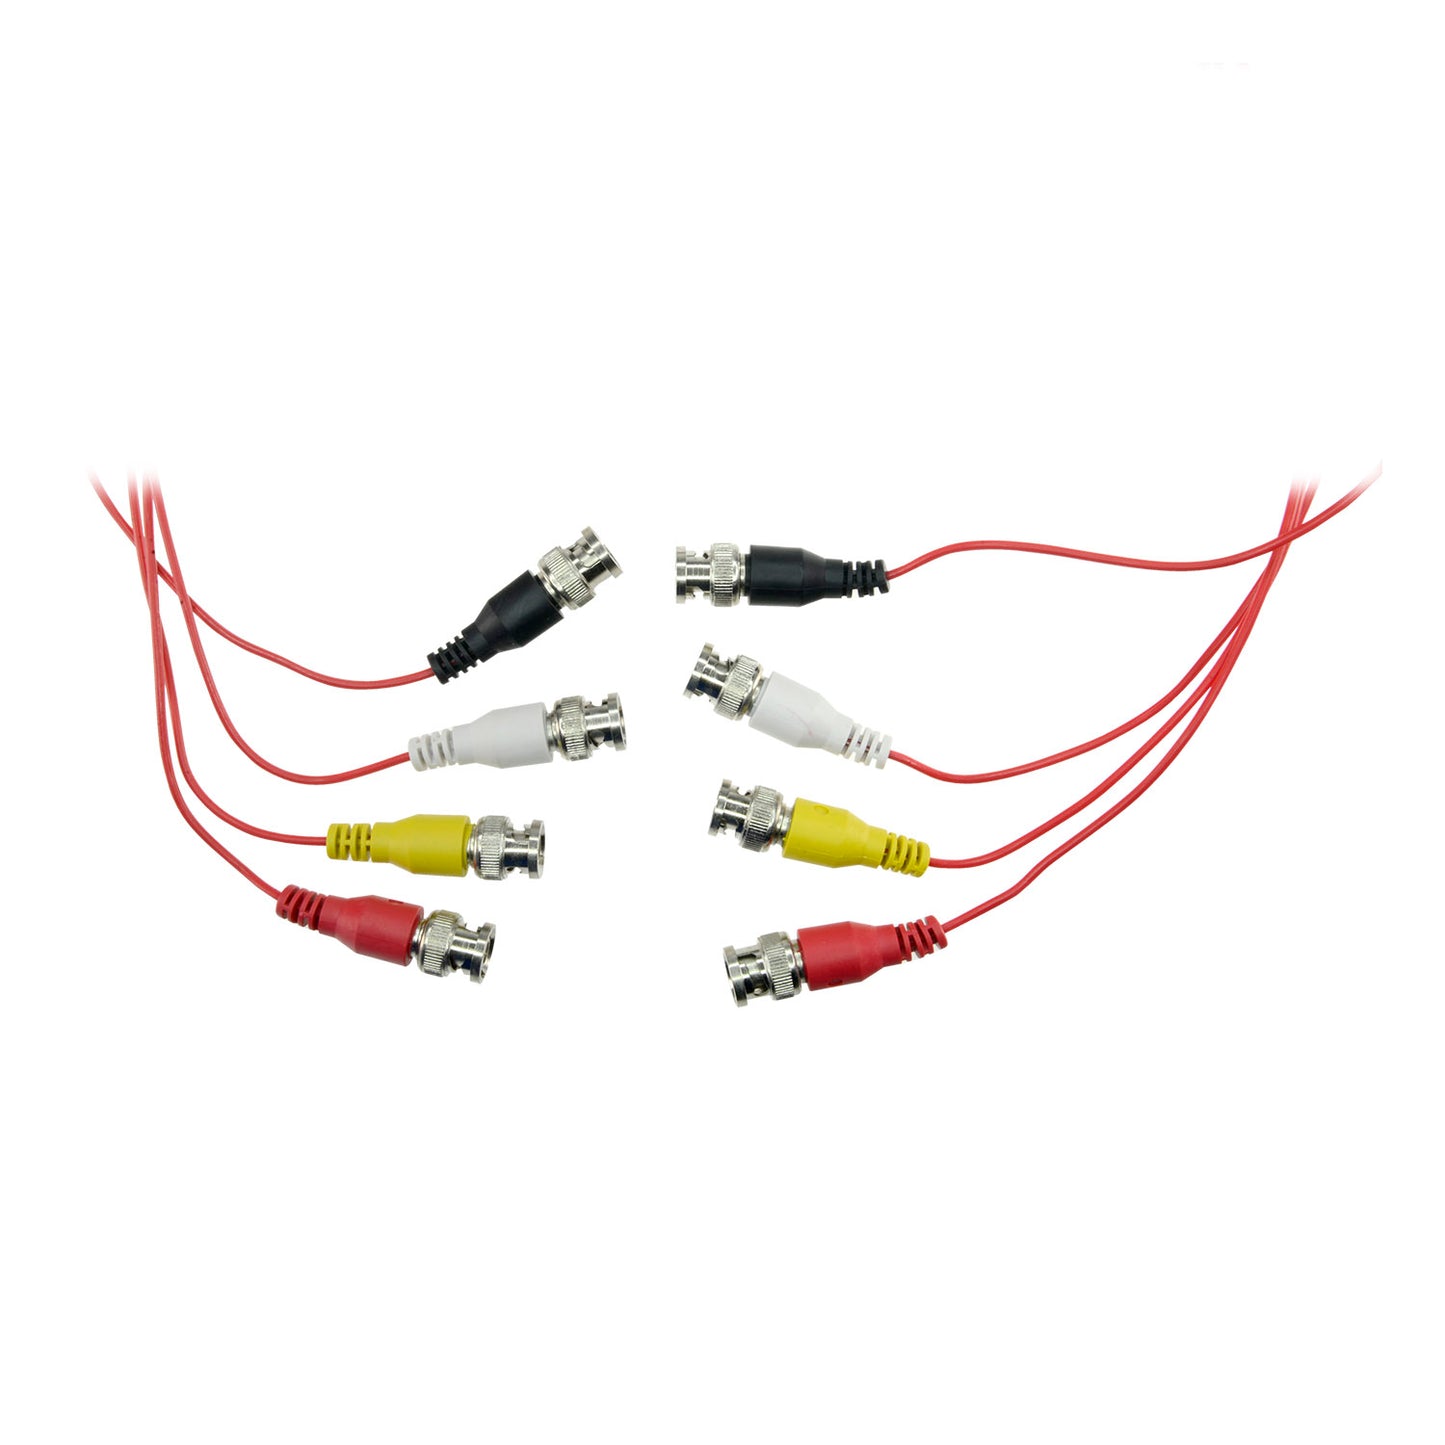 Prepared multiple cable - BNC male to BNC male - 4 coaxial joints - Length 1.5m - For connecting Balun to DVR - Compatible with BA614P and PV3208PH